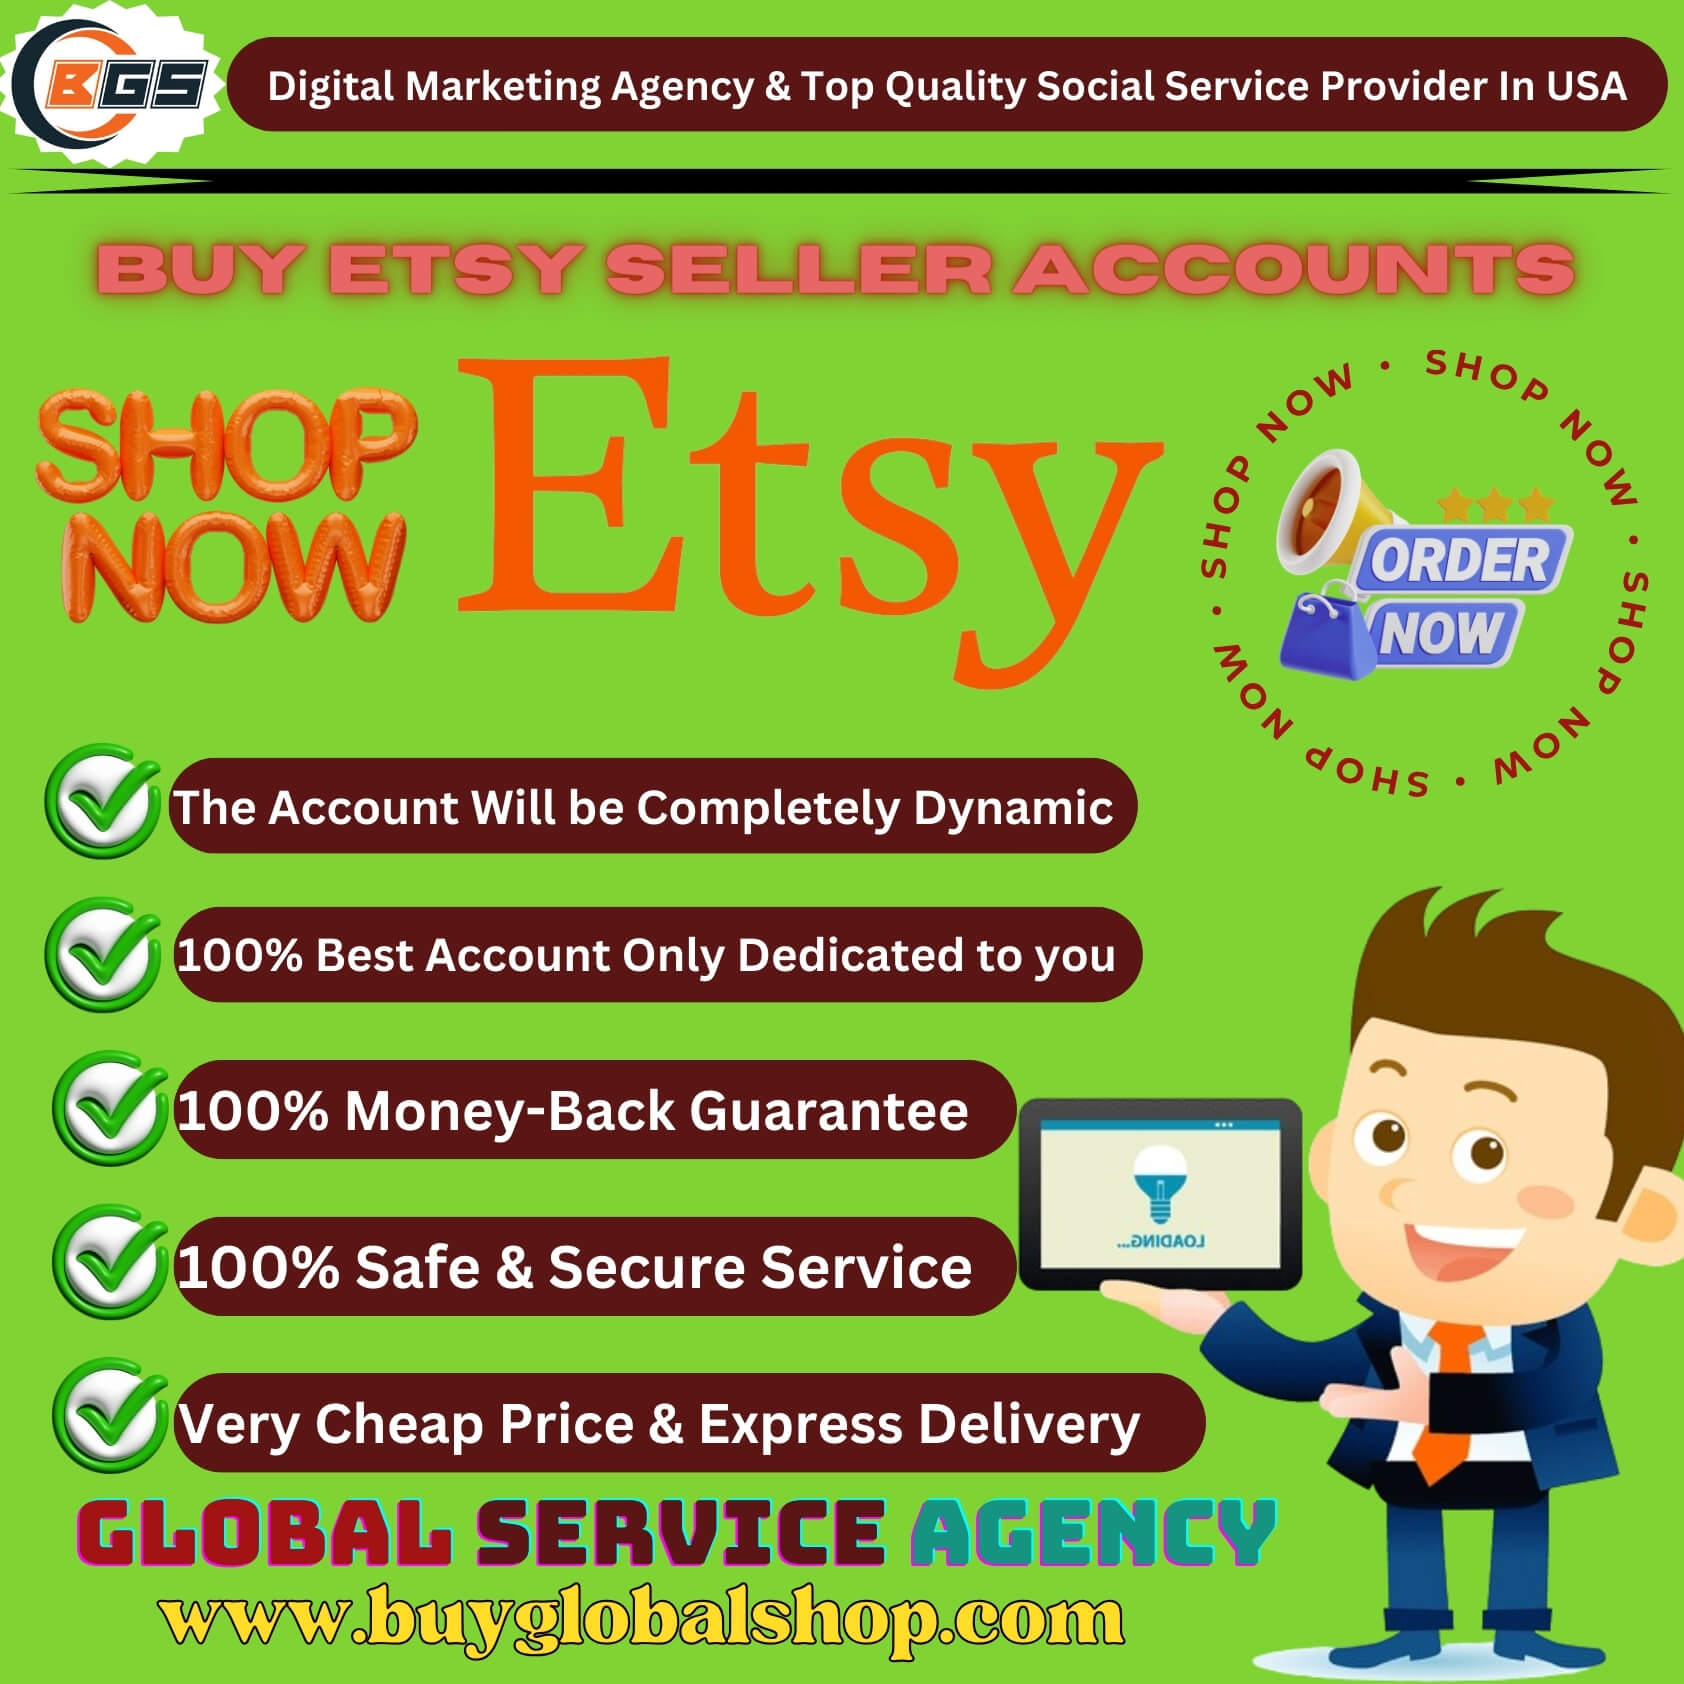 Buy Etsy Seller Accounts - 100% Best Quality & Full Verified Account